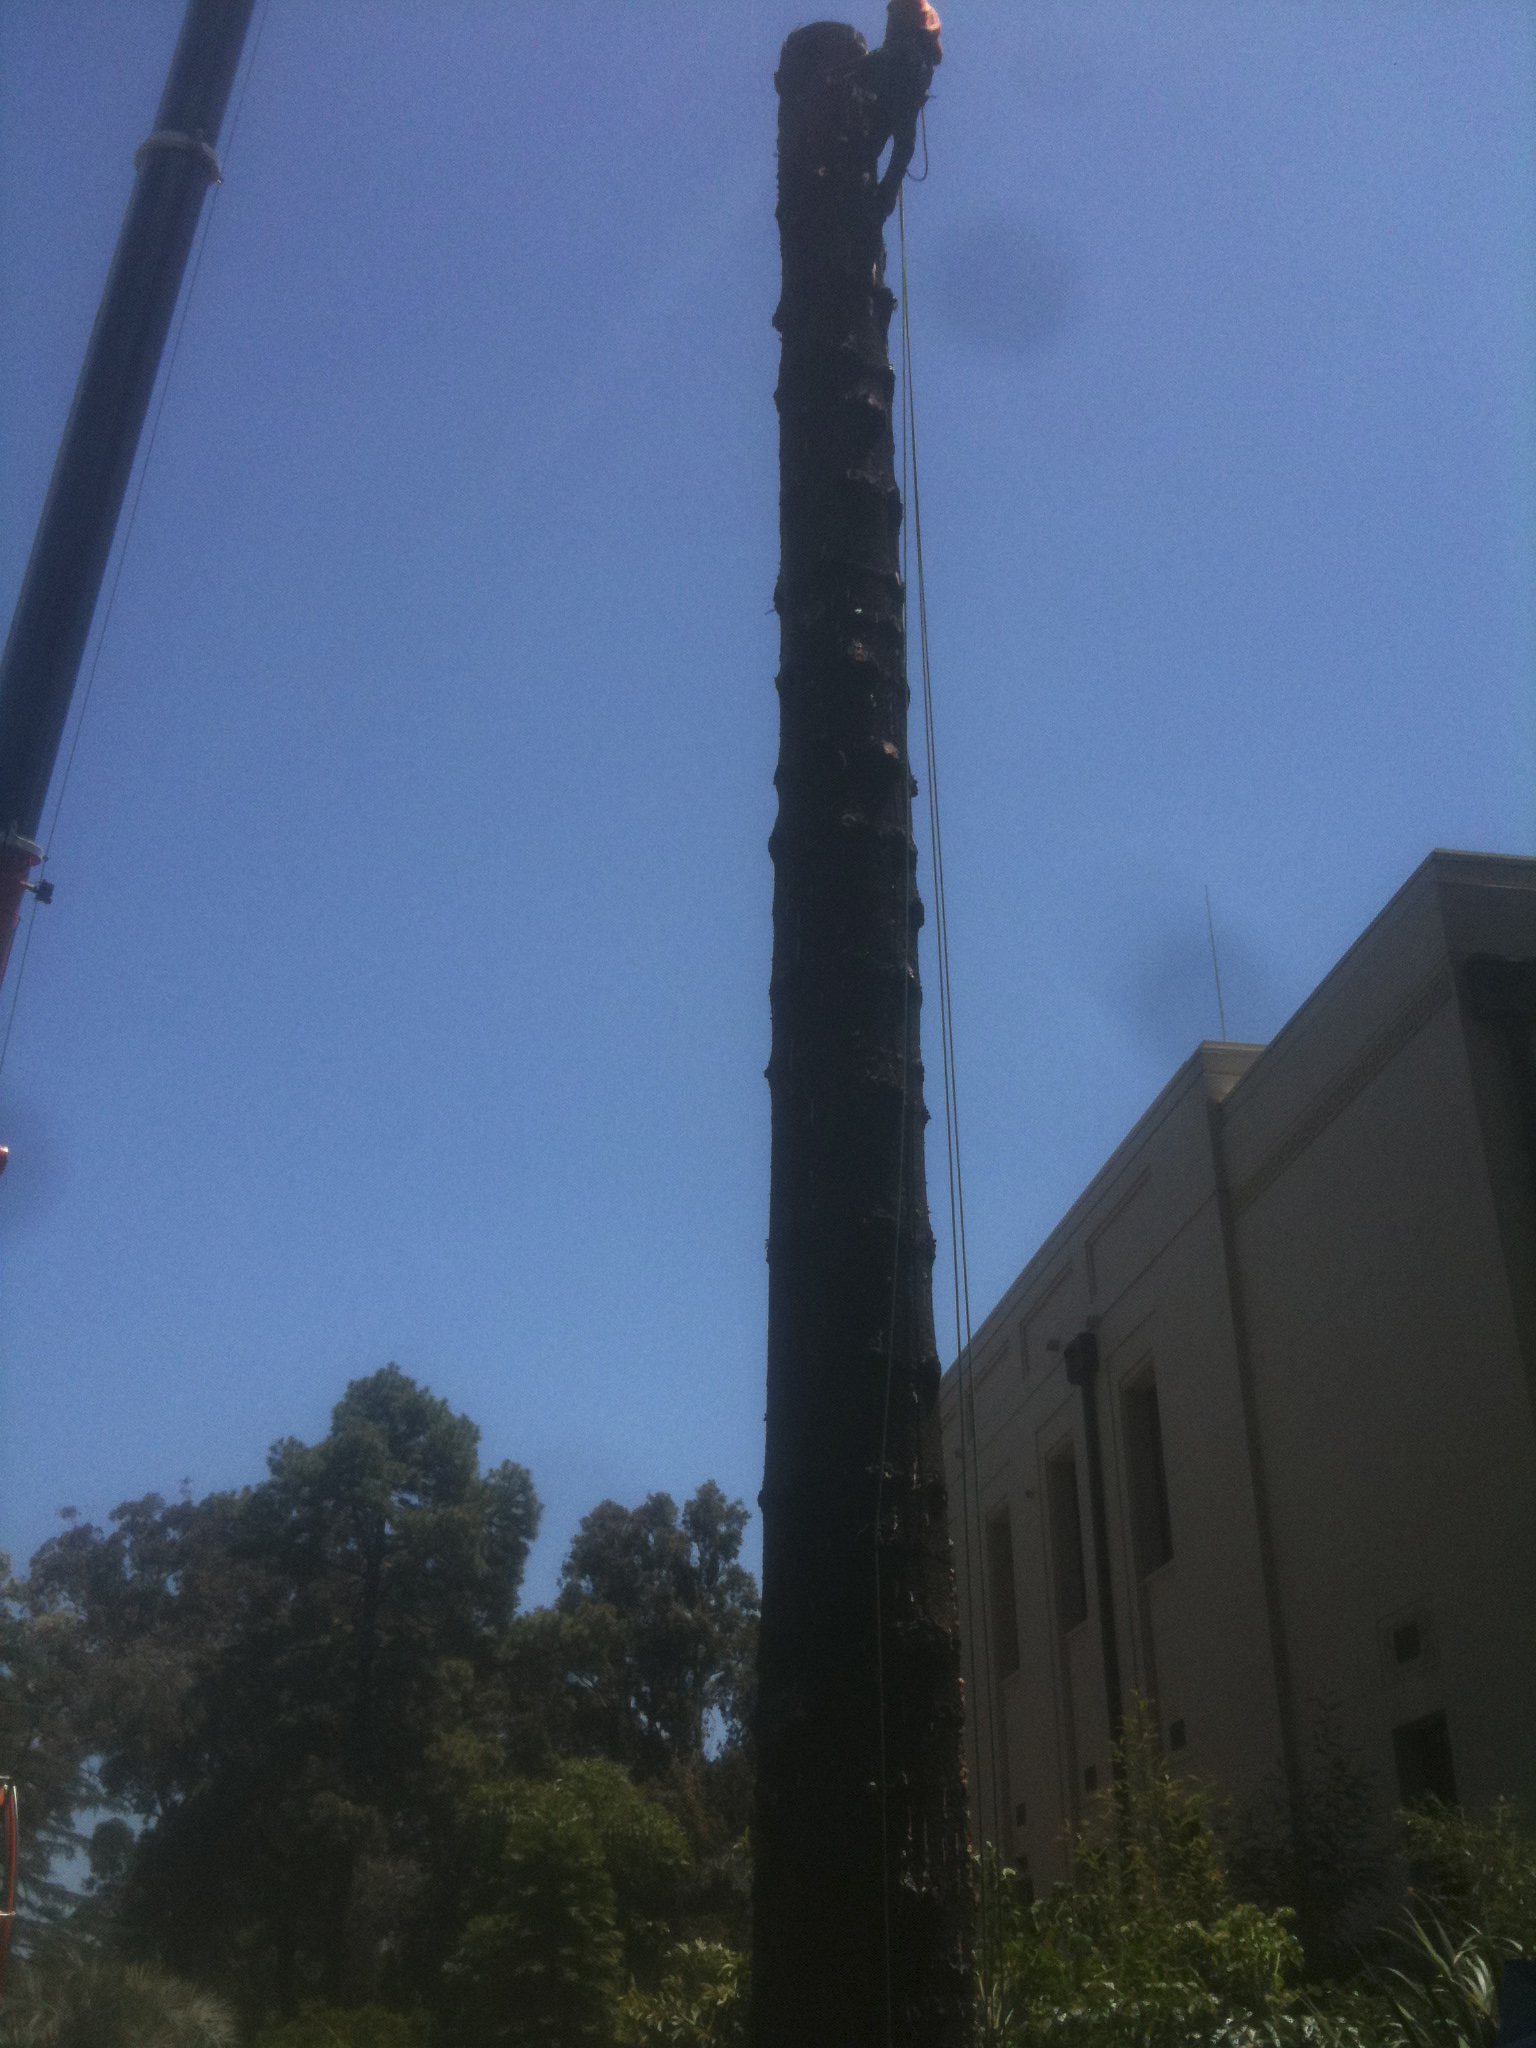 Tree Lifting - JFK Mobile crane hire and rigging Melbourne